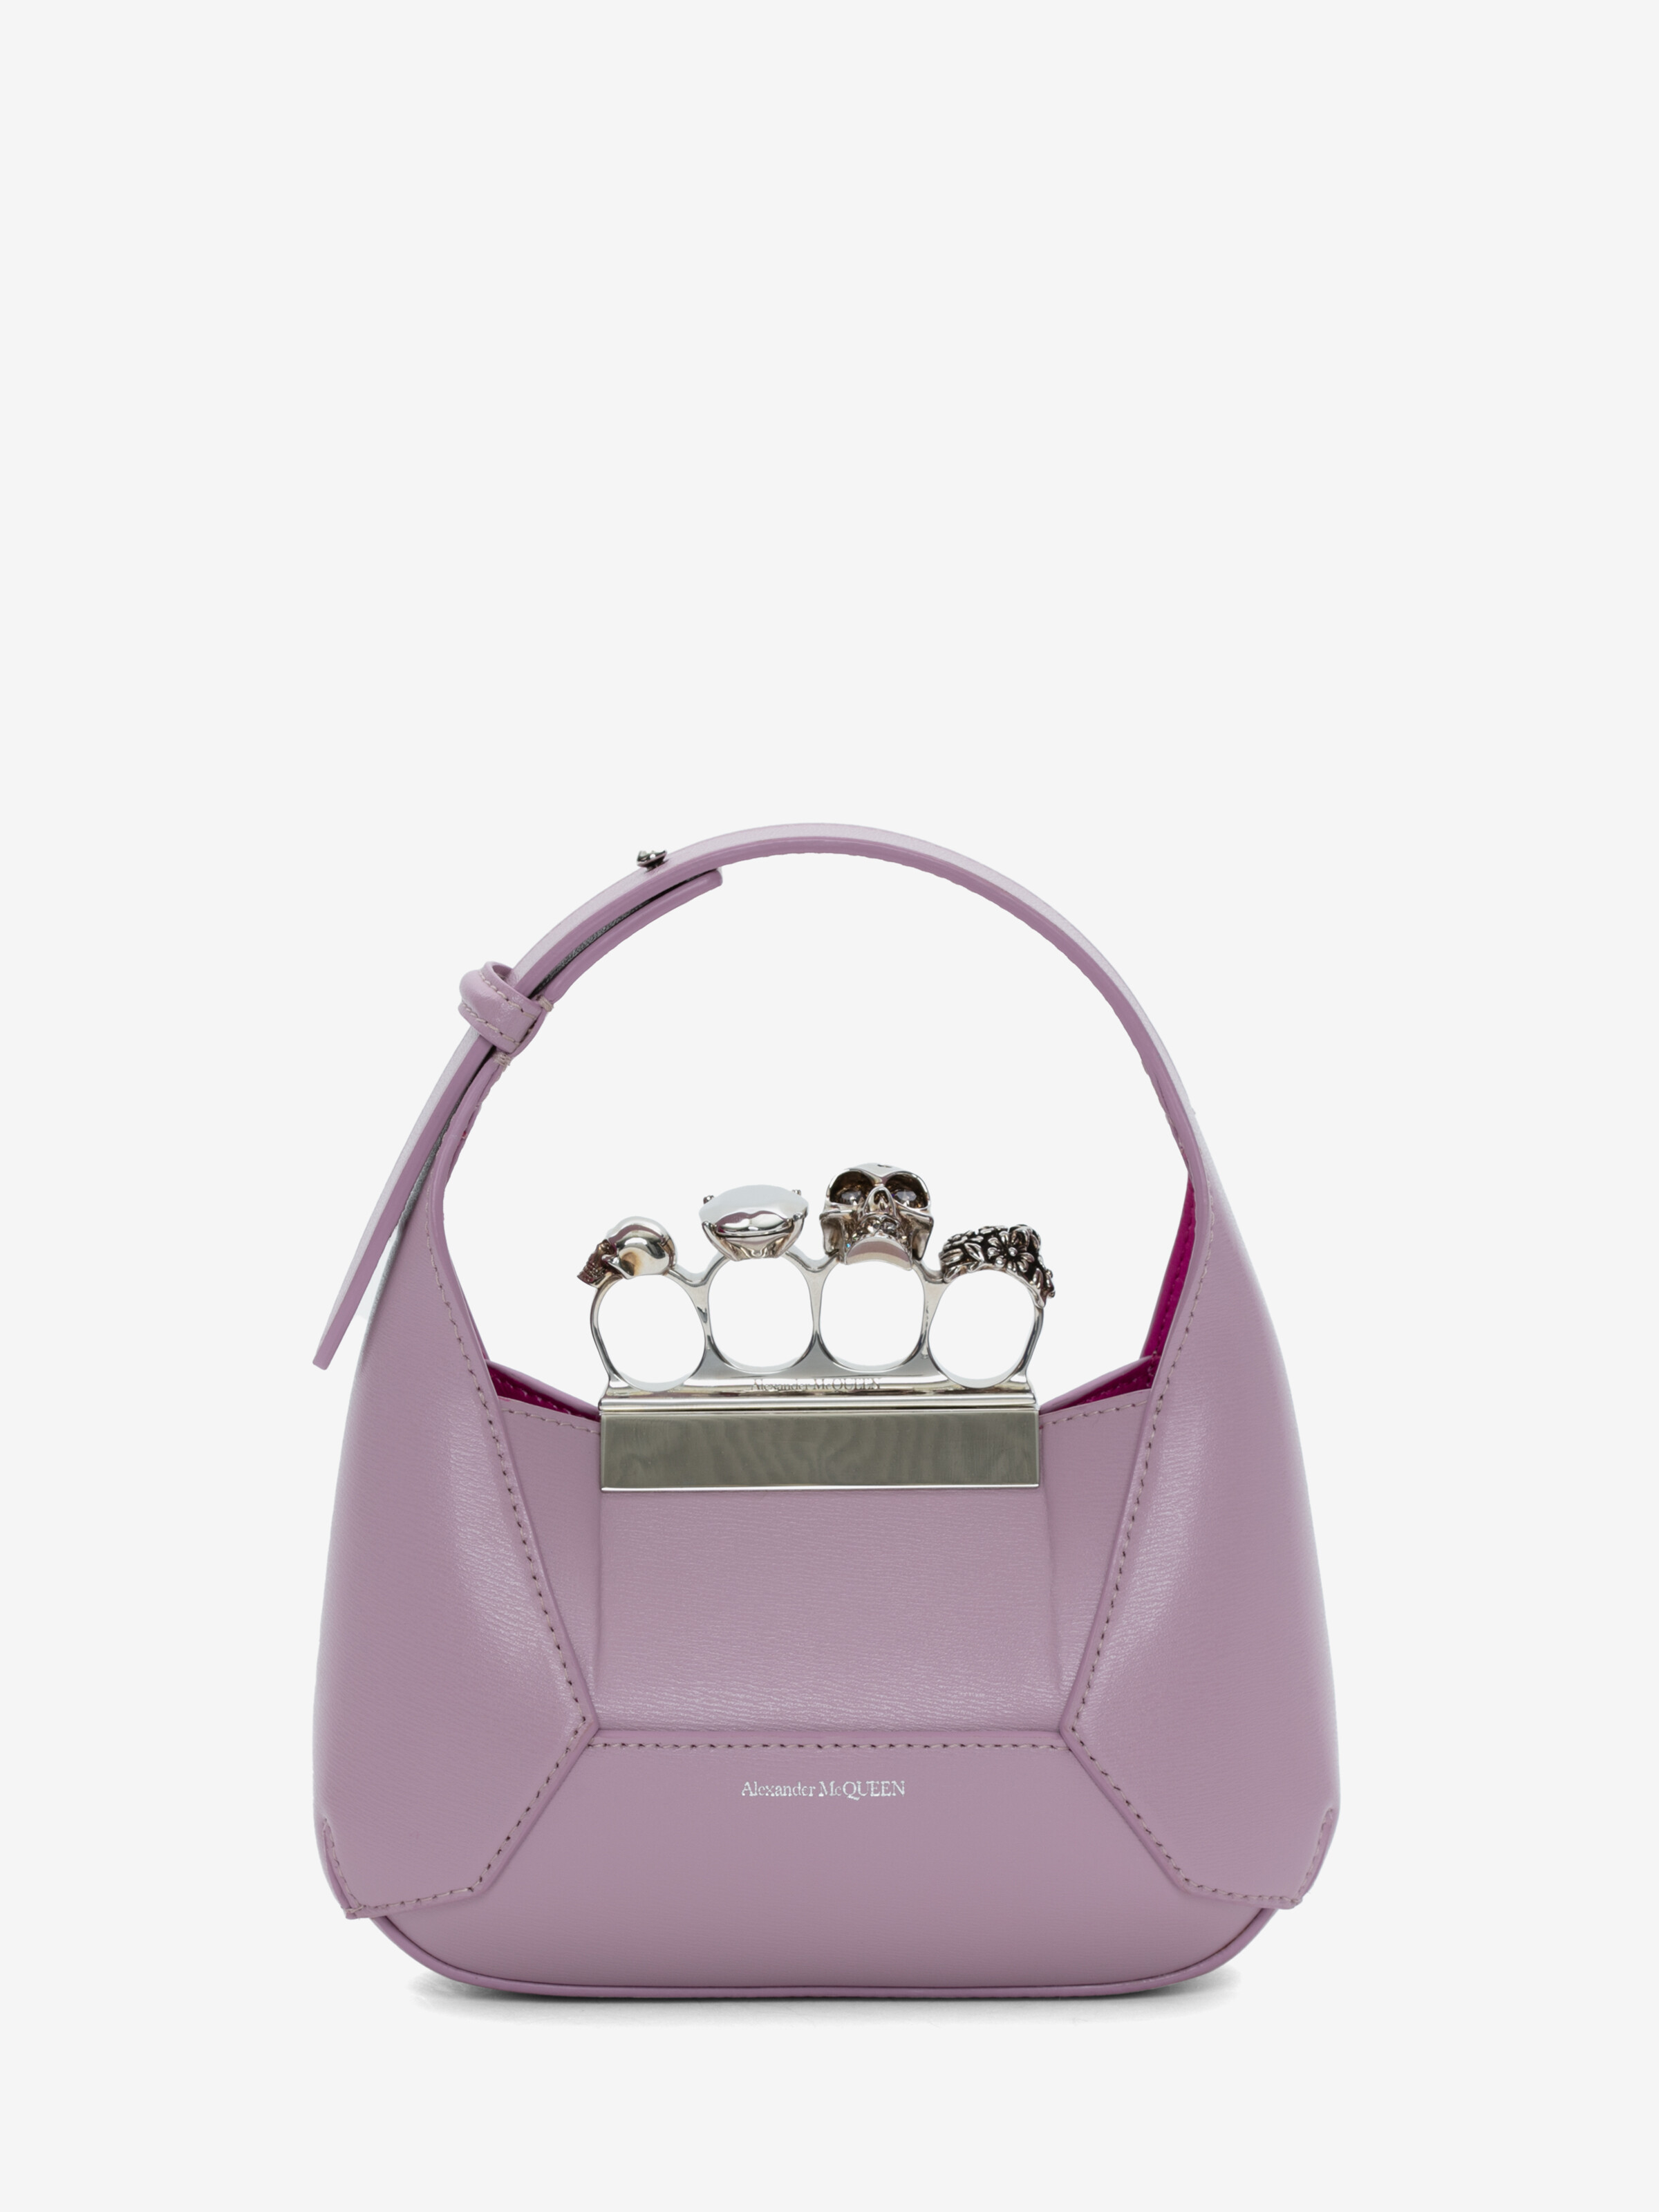 The Jewelled Hobo Mini Bag in Antique Pink